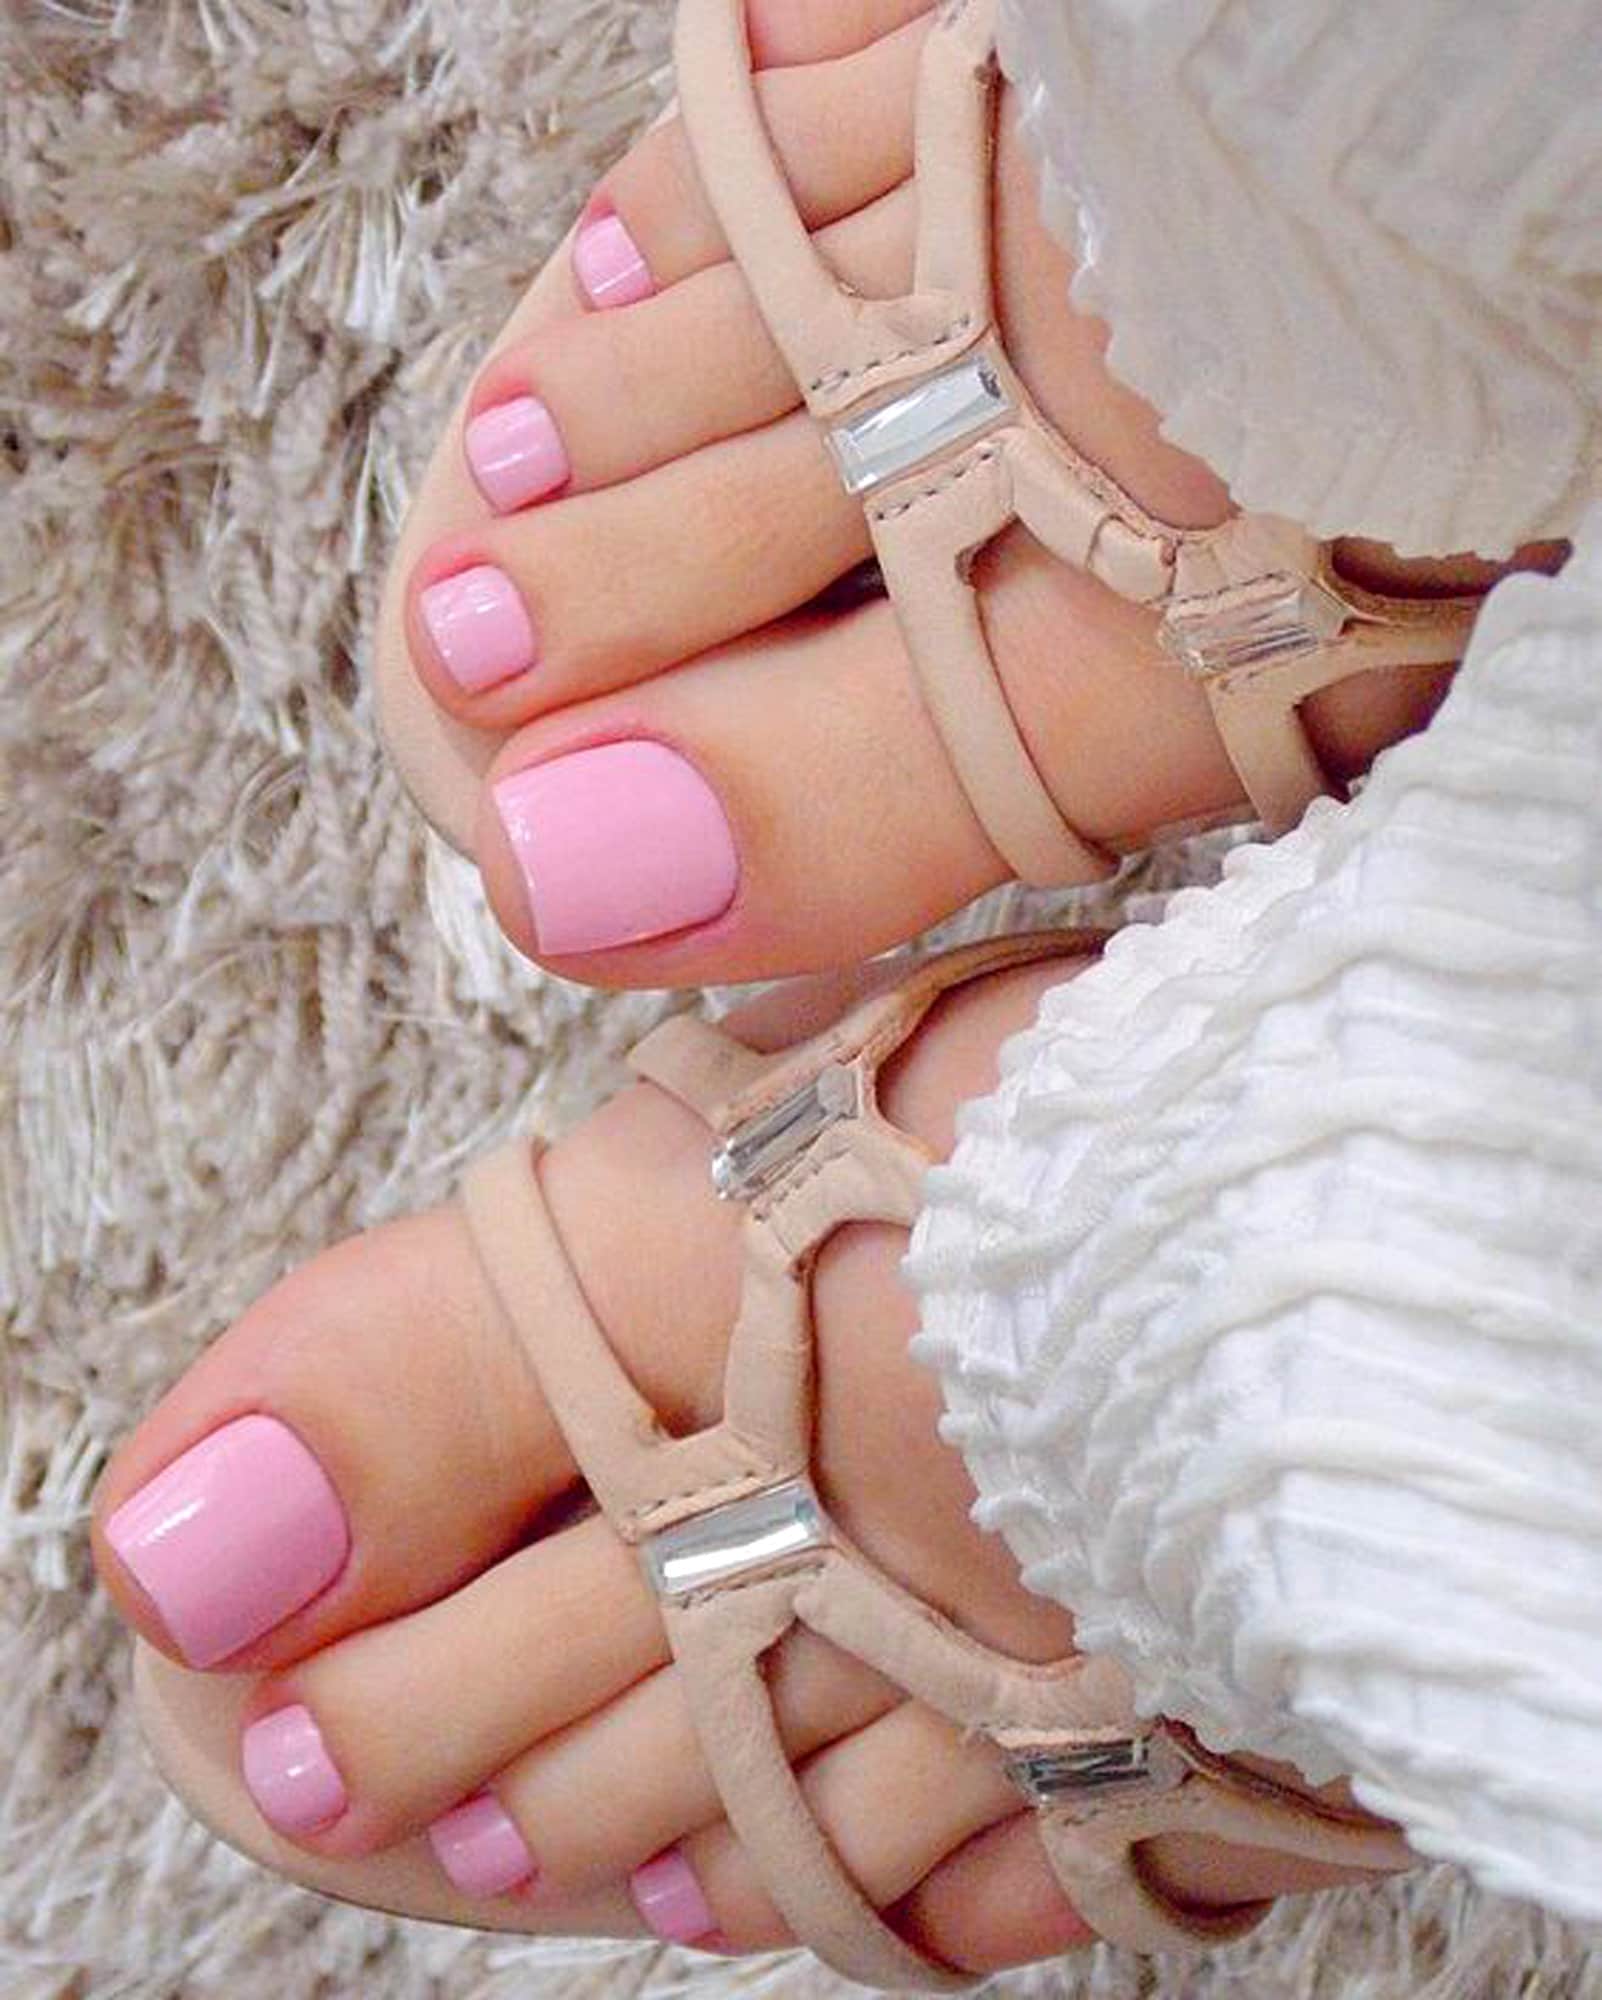 Female Feet with Pink Pedicure. Stock Photo - Image of human, healthy:  120422764